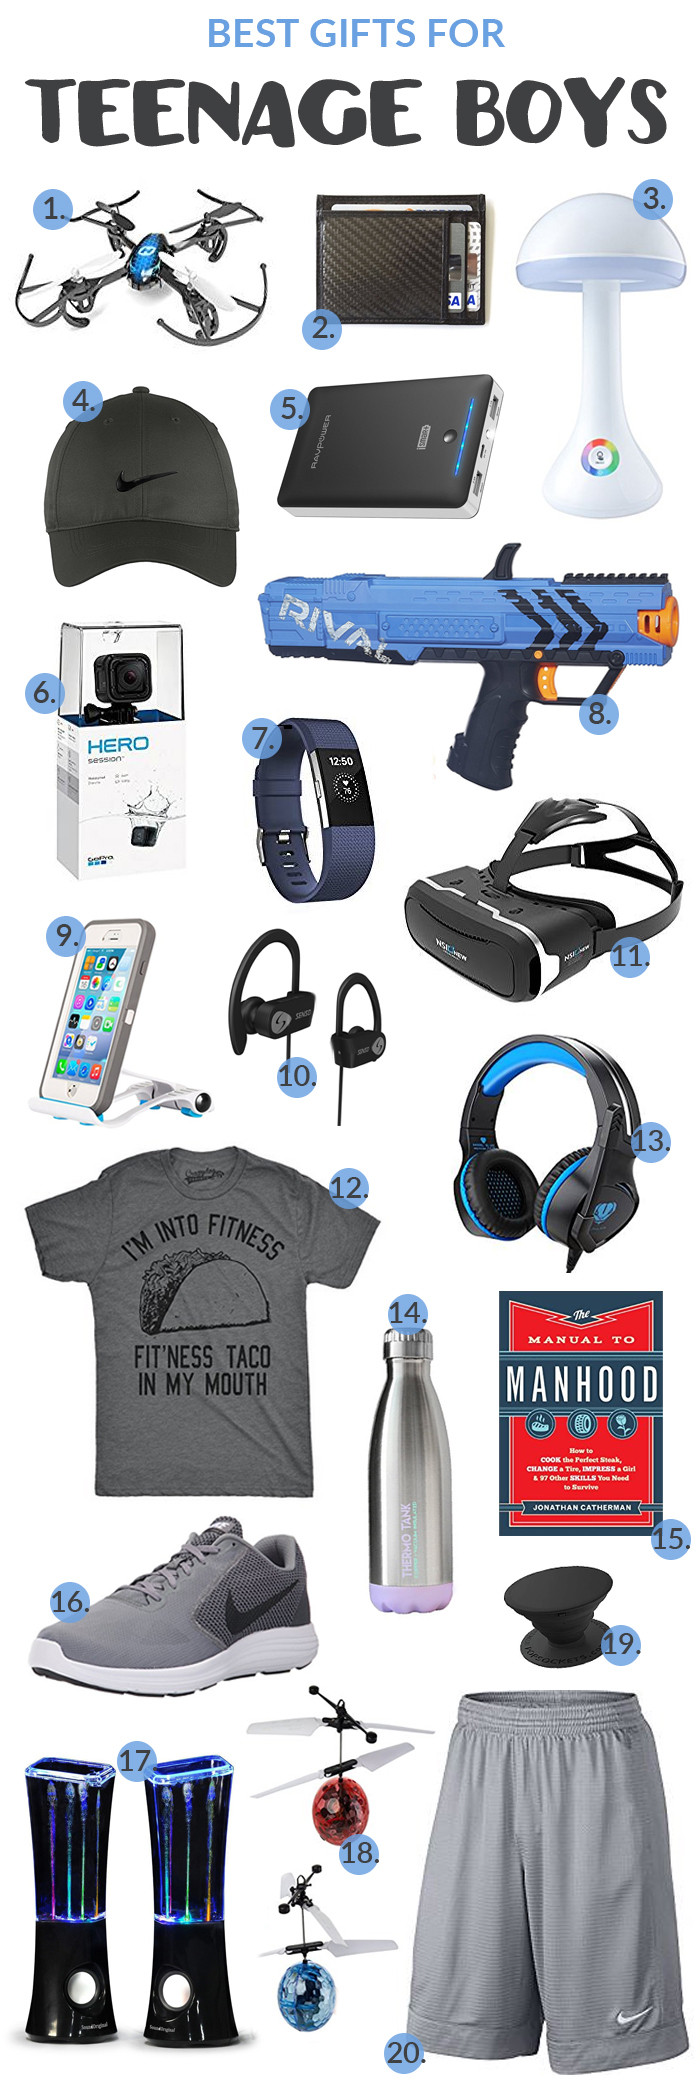 Gift Ideas For Young Boys
 Best Gifts for Teenage Boys — Our Kind of Crazy